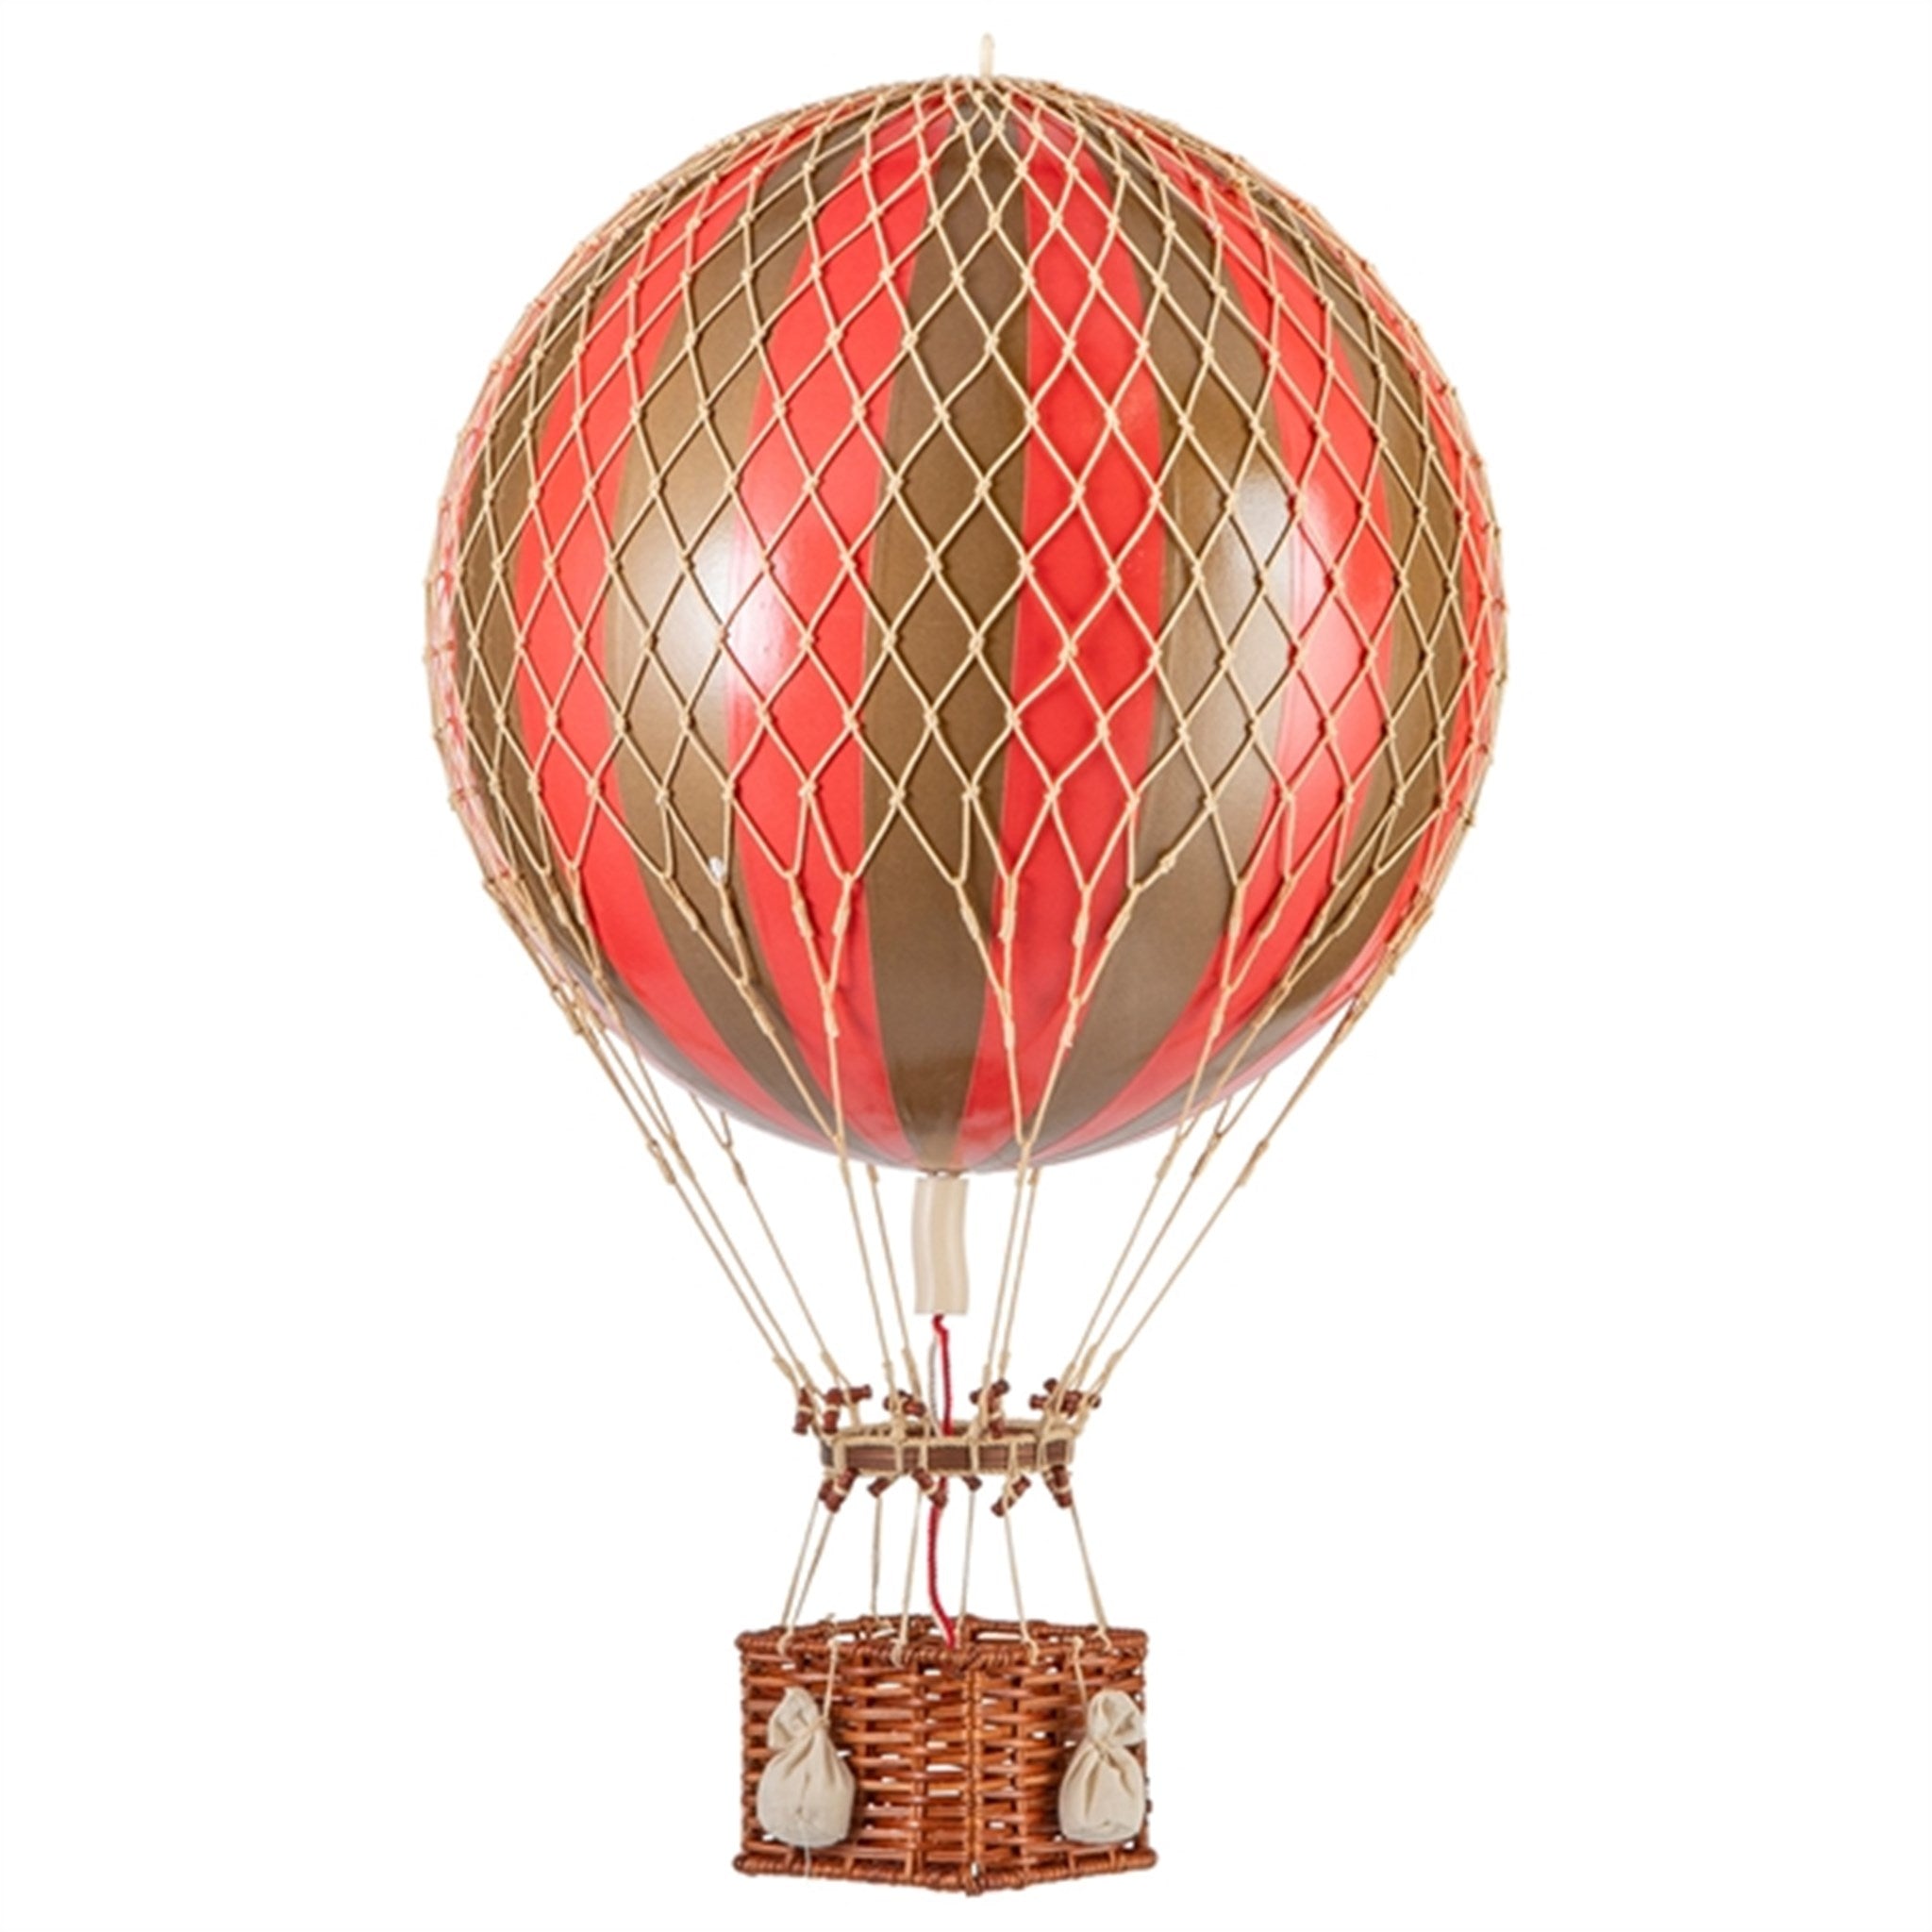 Authentic Models Balloon Gold Red 32 cm